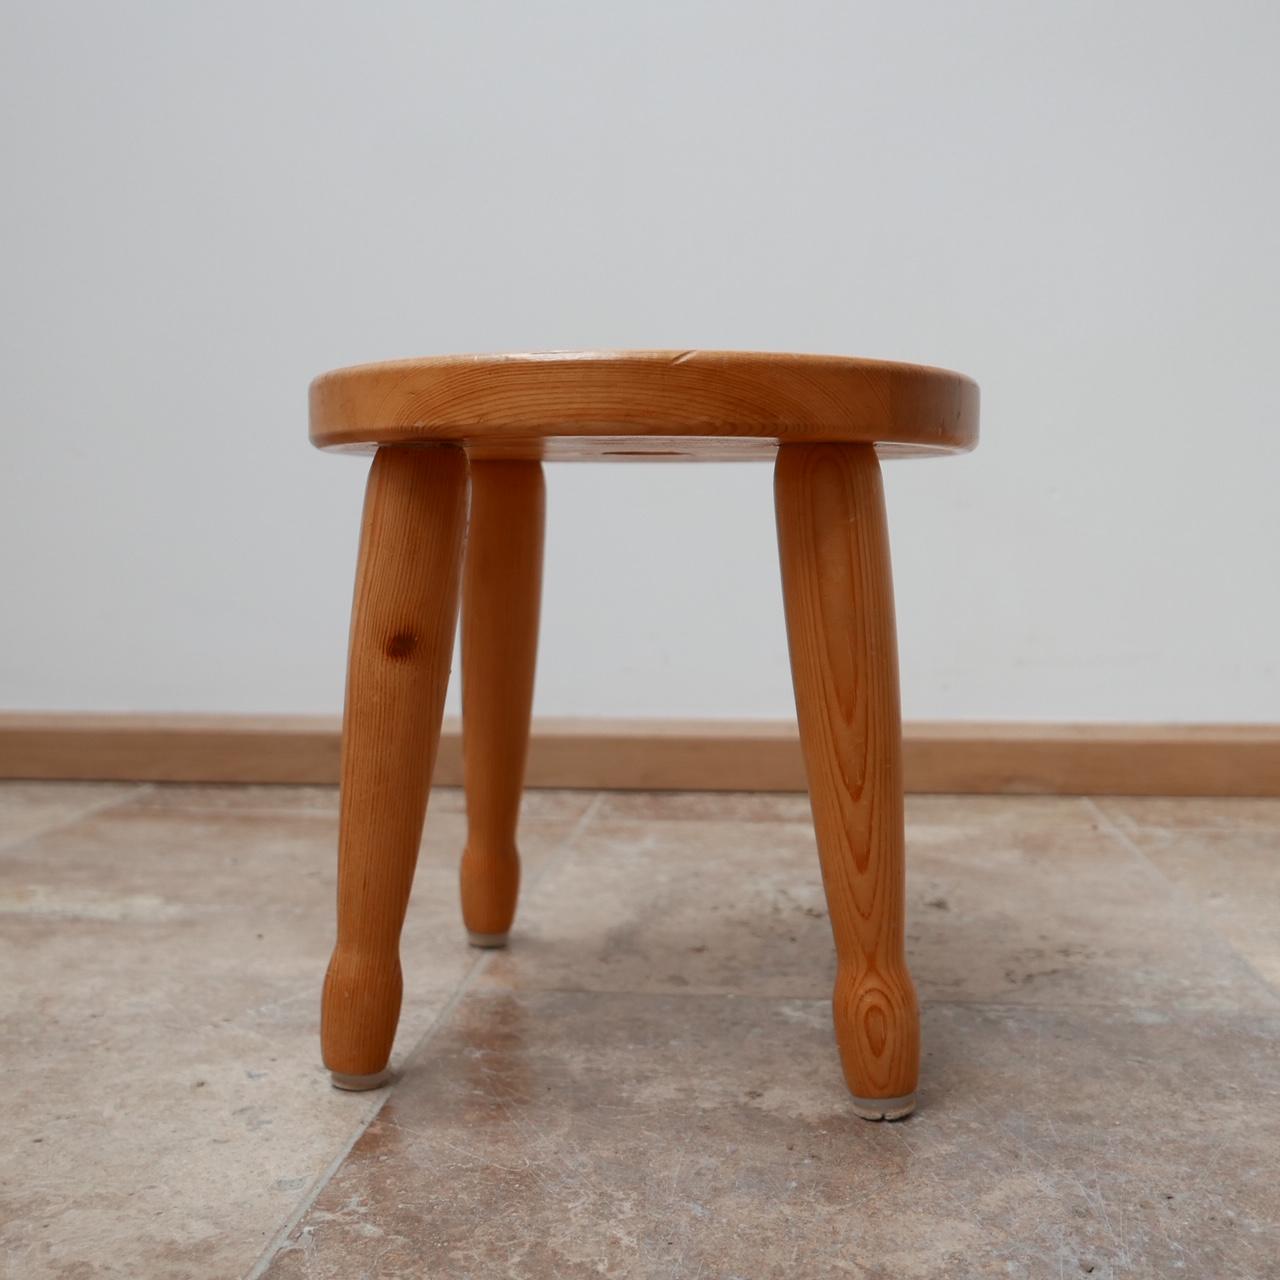 A midcentury stool or side table.

Pine, Sweden, circa 1960s.

Four legs, simple construction.

Dimensions: 30 diameter x 30 height in cm.
 